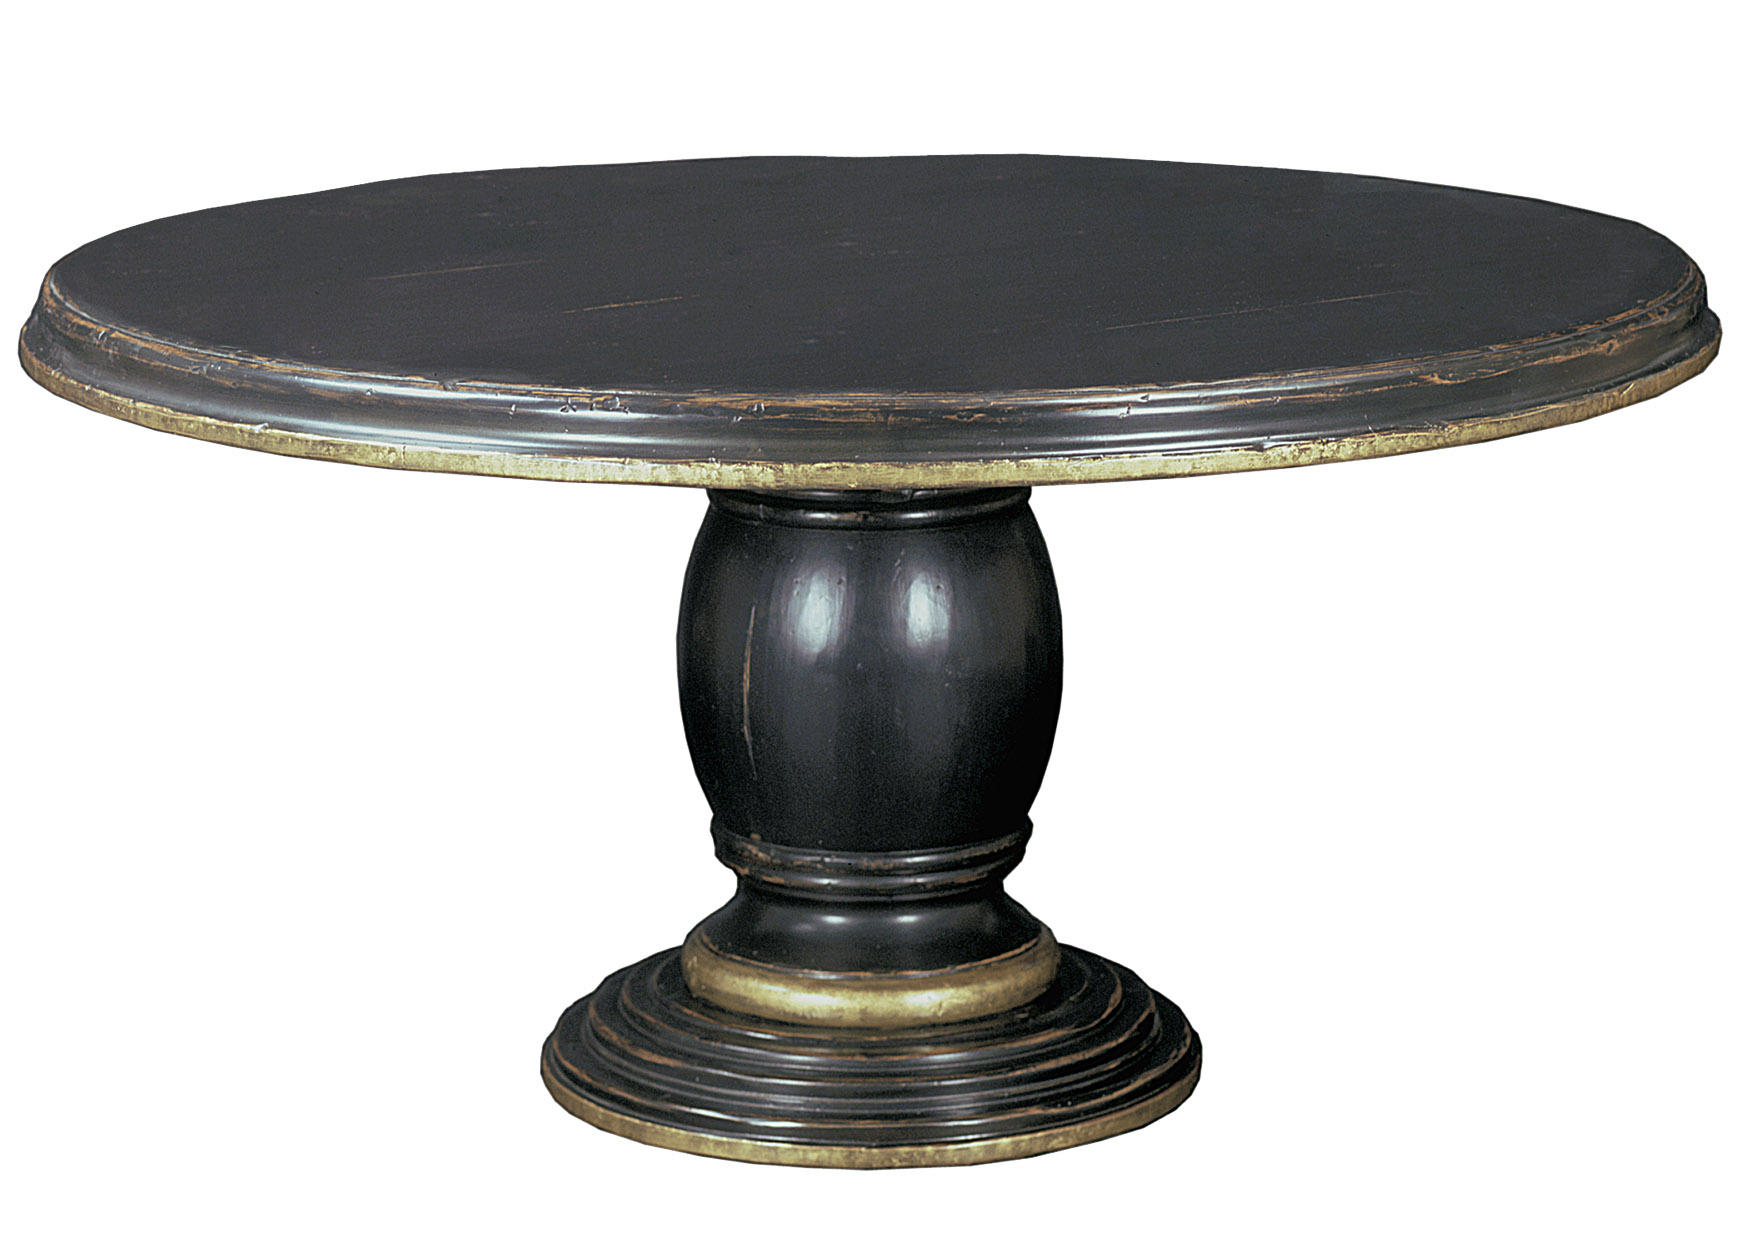 Aberdeen traditional black round pedestal dining table with metal accent gilding by Woodland furniture in Idaho Falls